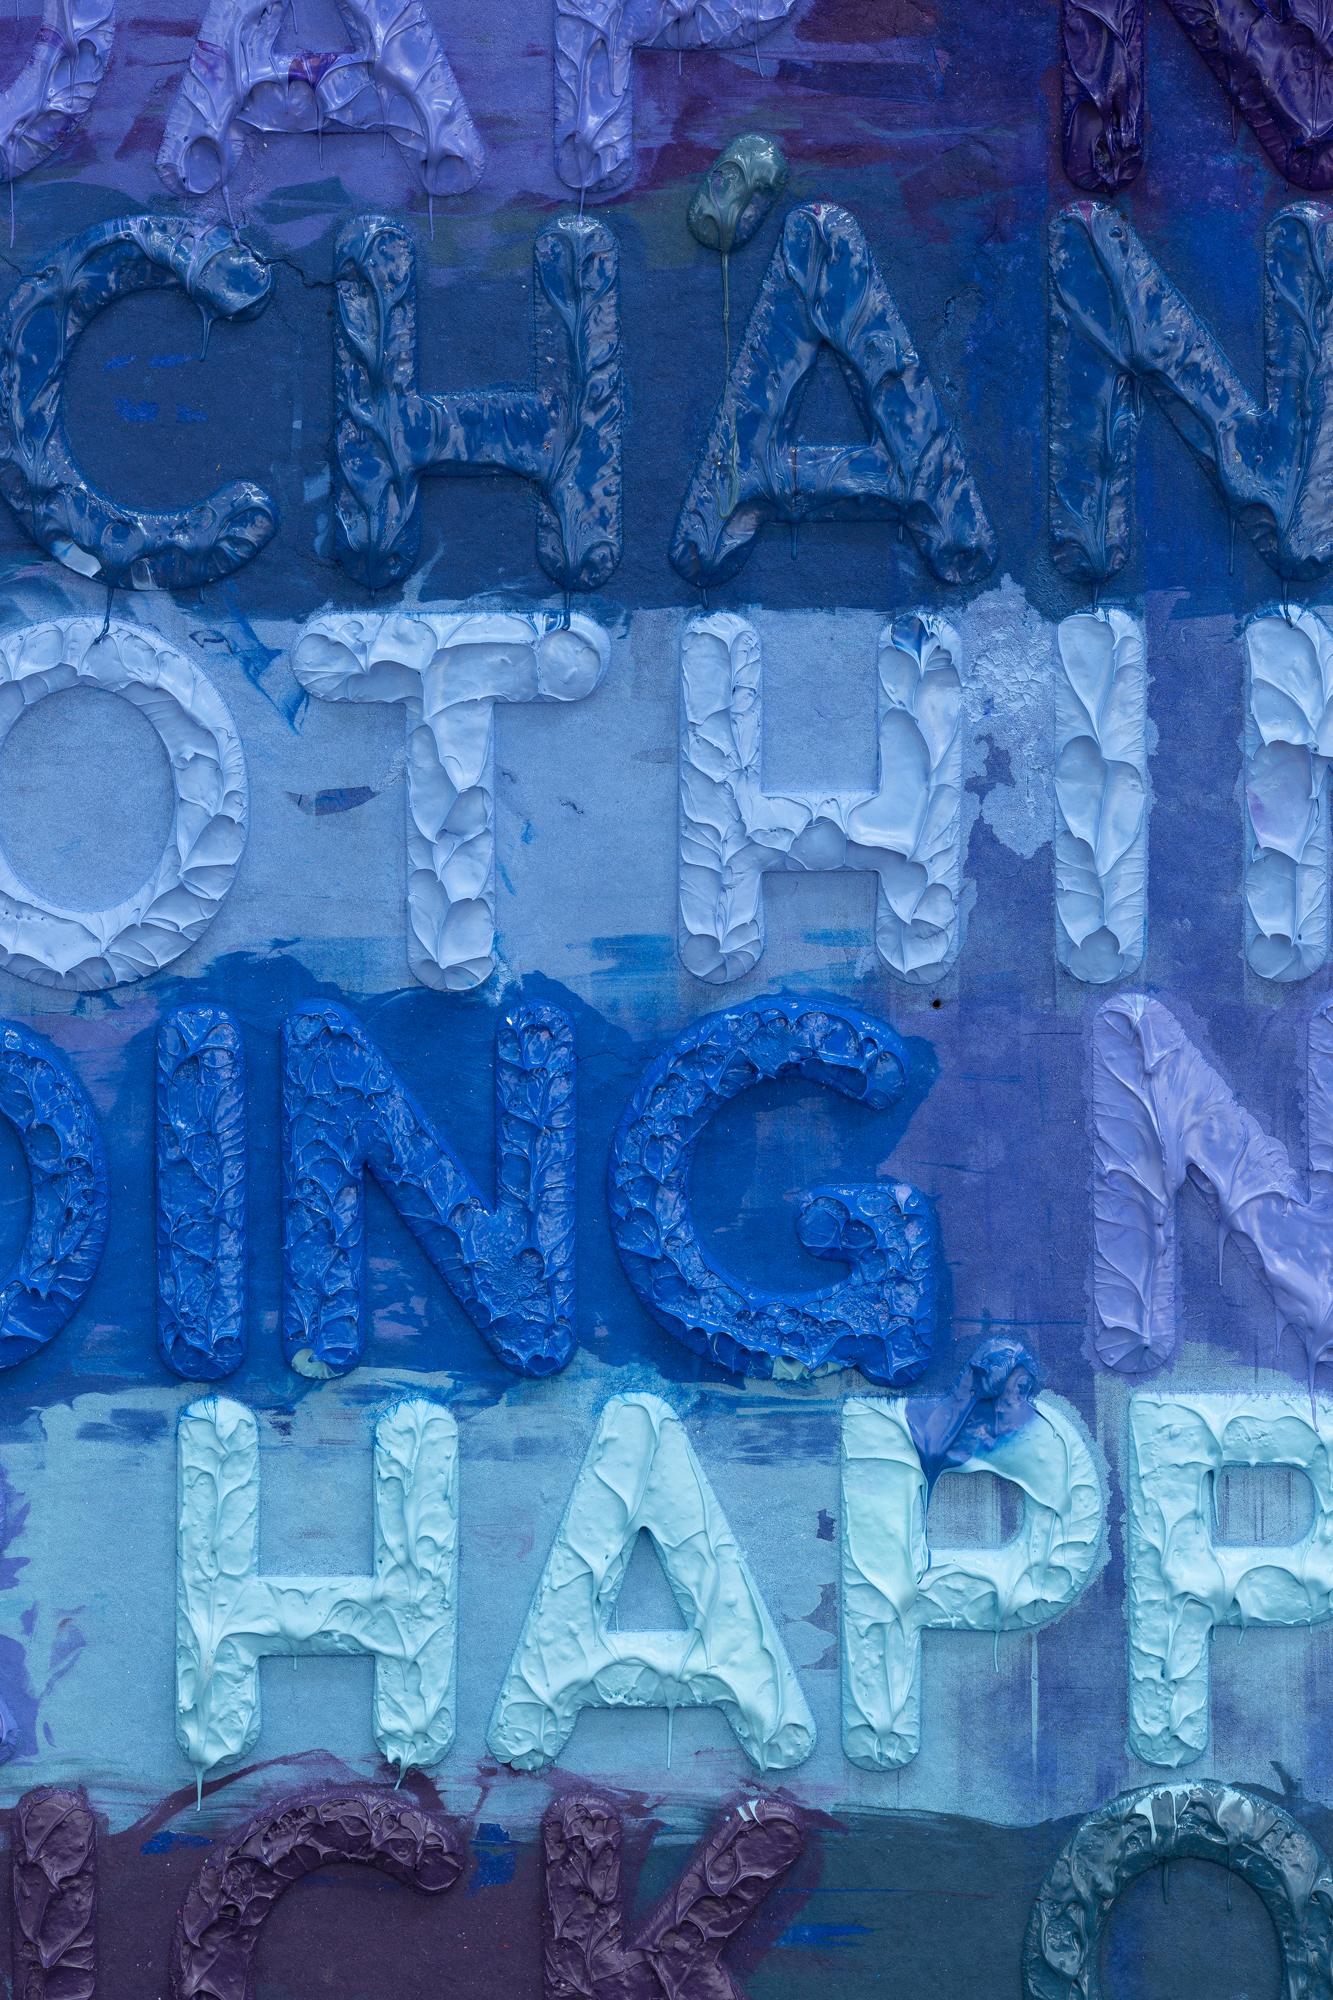 No - Contemporary Painting by Mel Bochner